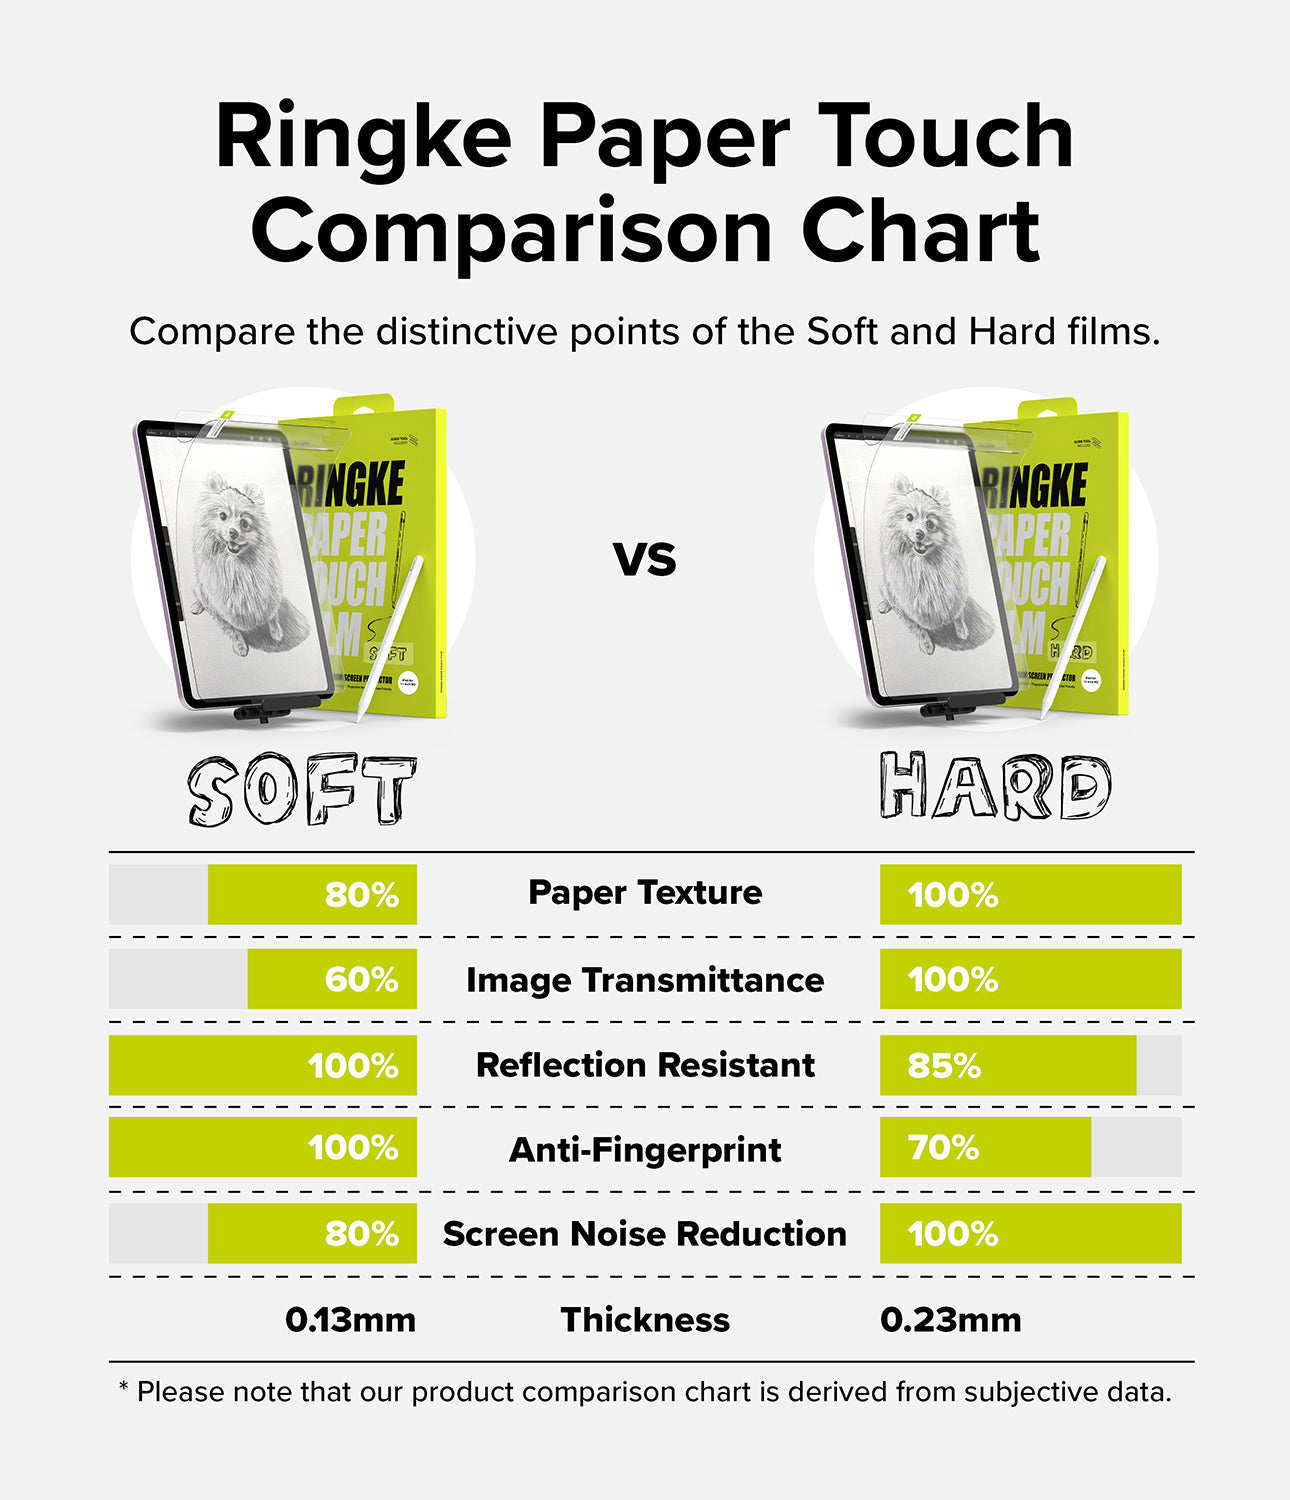 iPad Air 11" (M2) Screen Protector | Paper Touch Film - Soft - Ringke Paper Touch Comparison Chart. Compare the distinctive points of the Soft and Hard films.